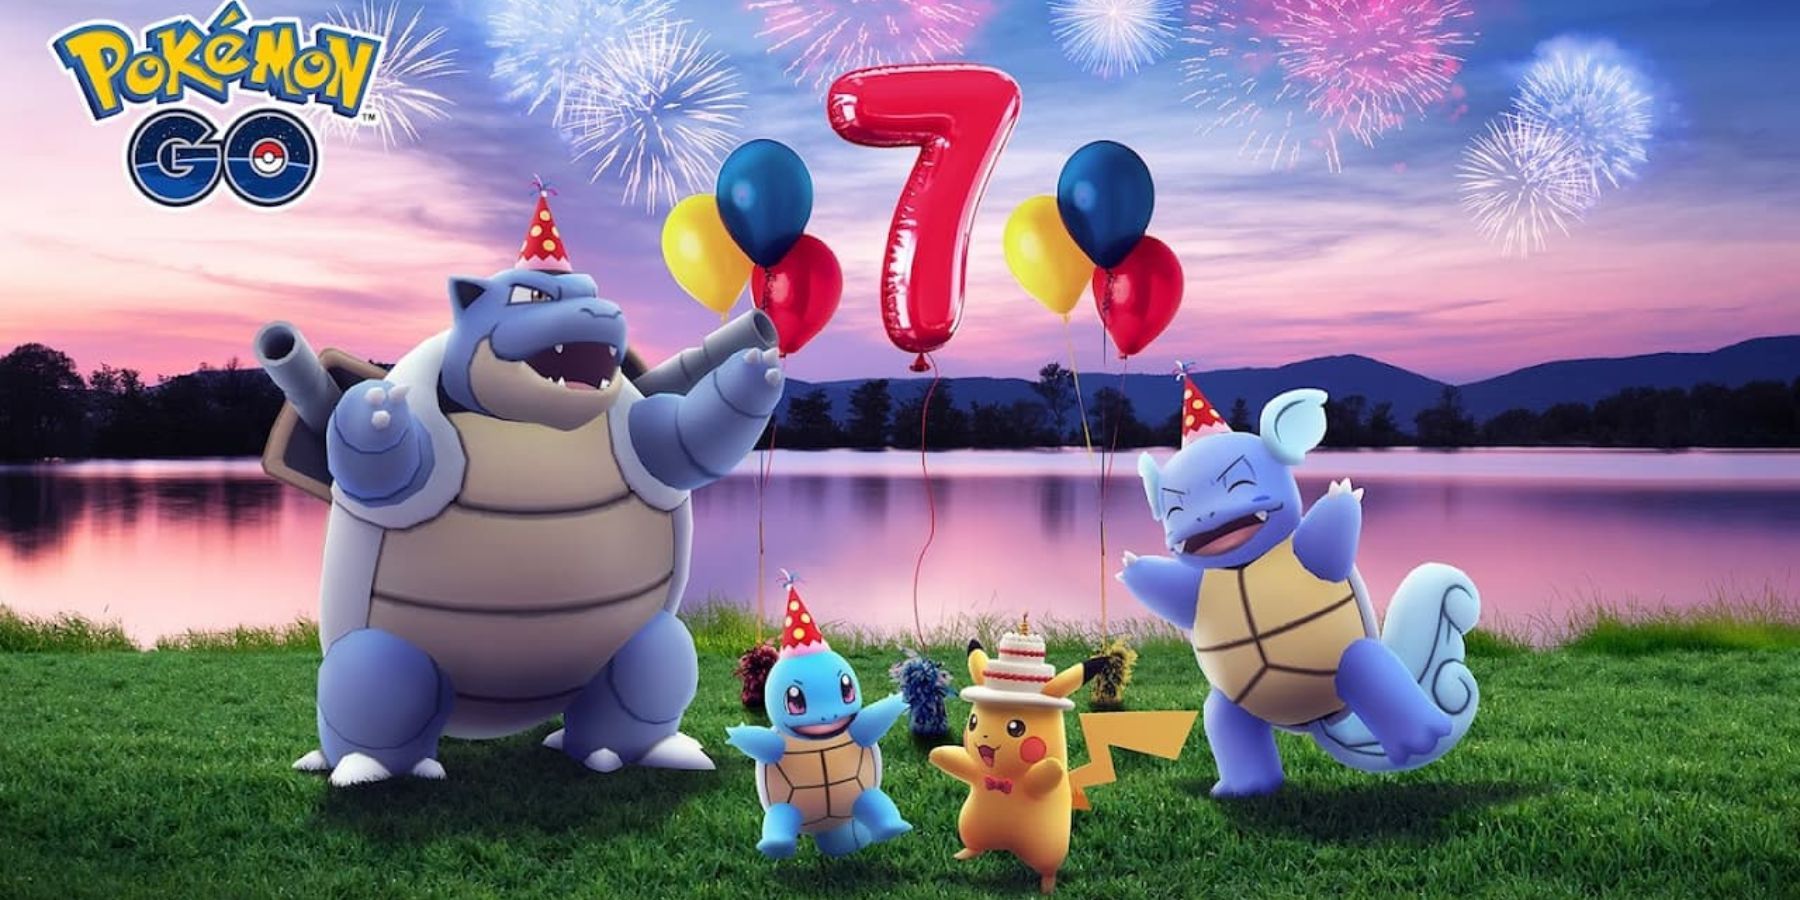 7th Anniversary Party event in Pokemon GO poster